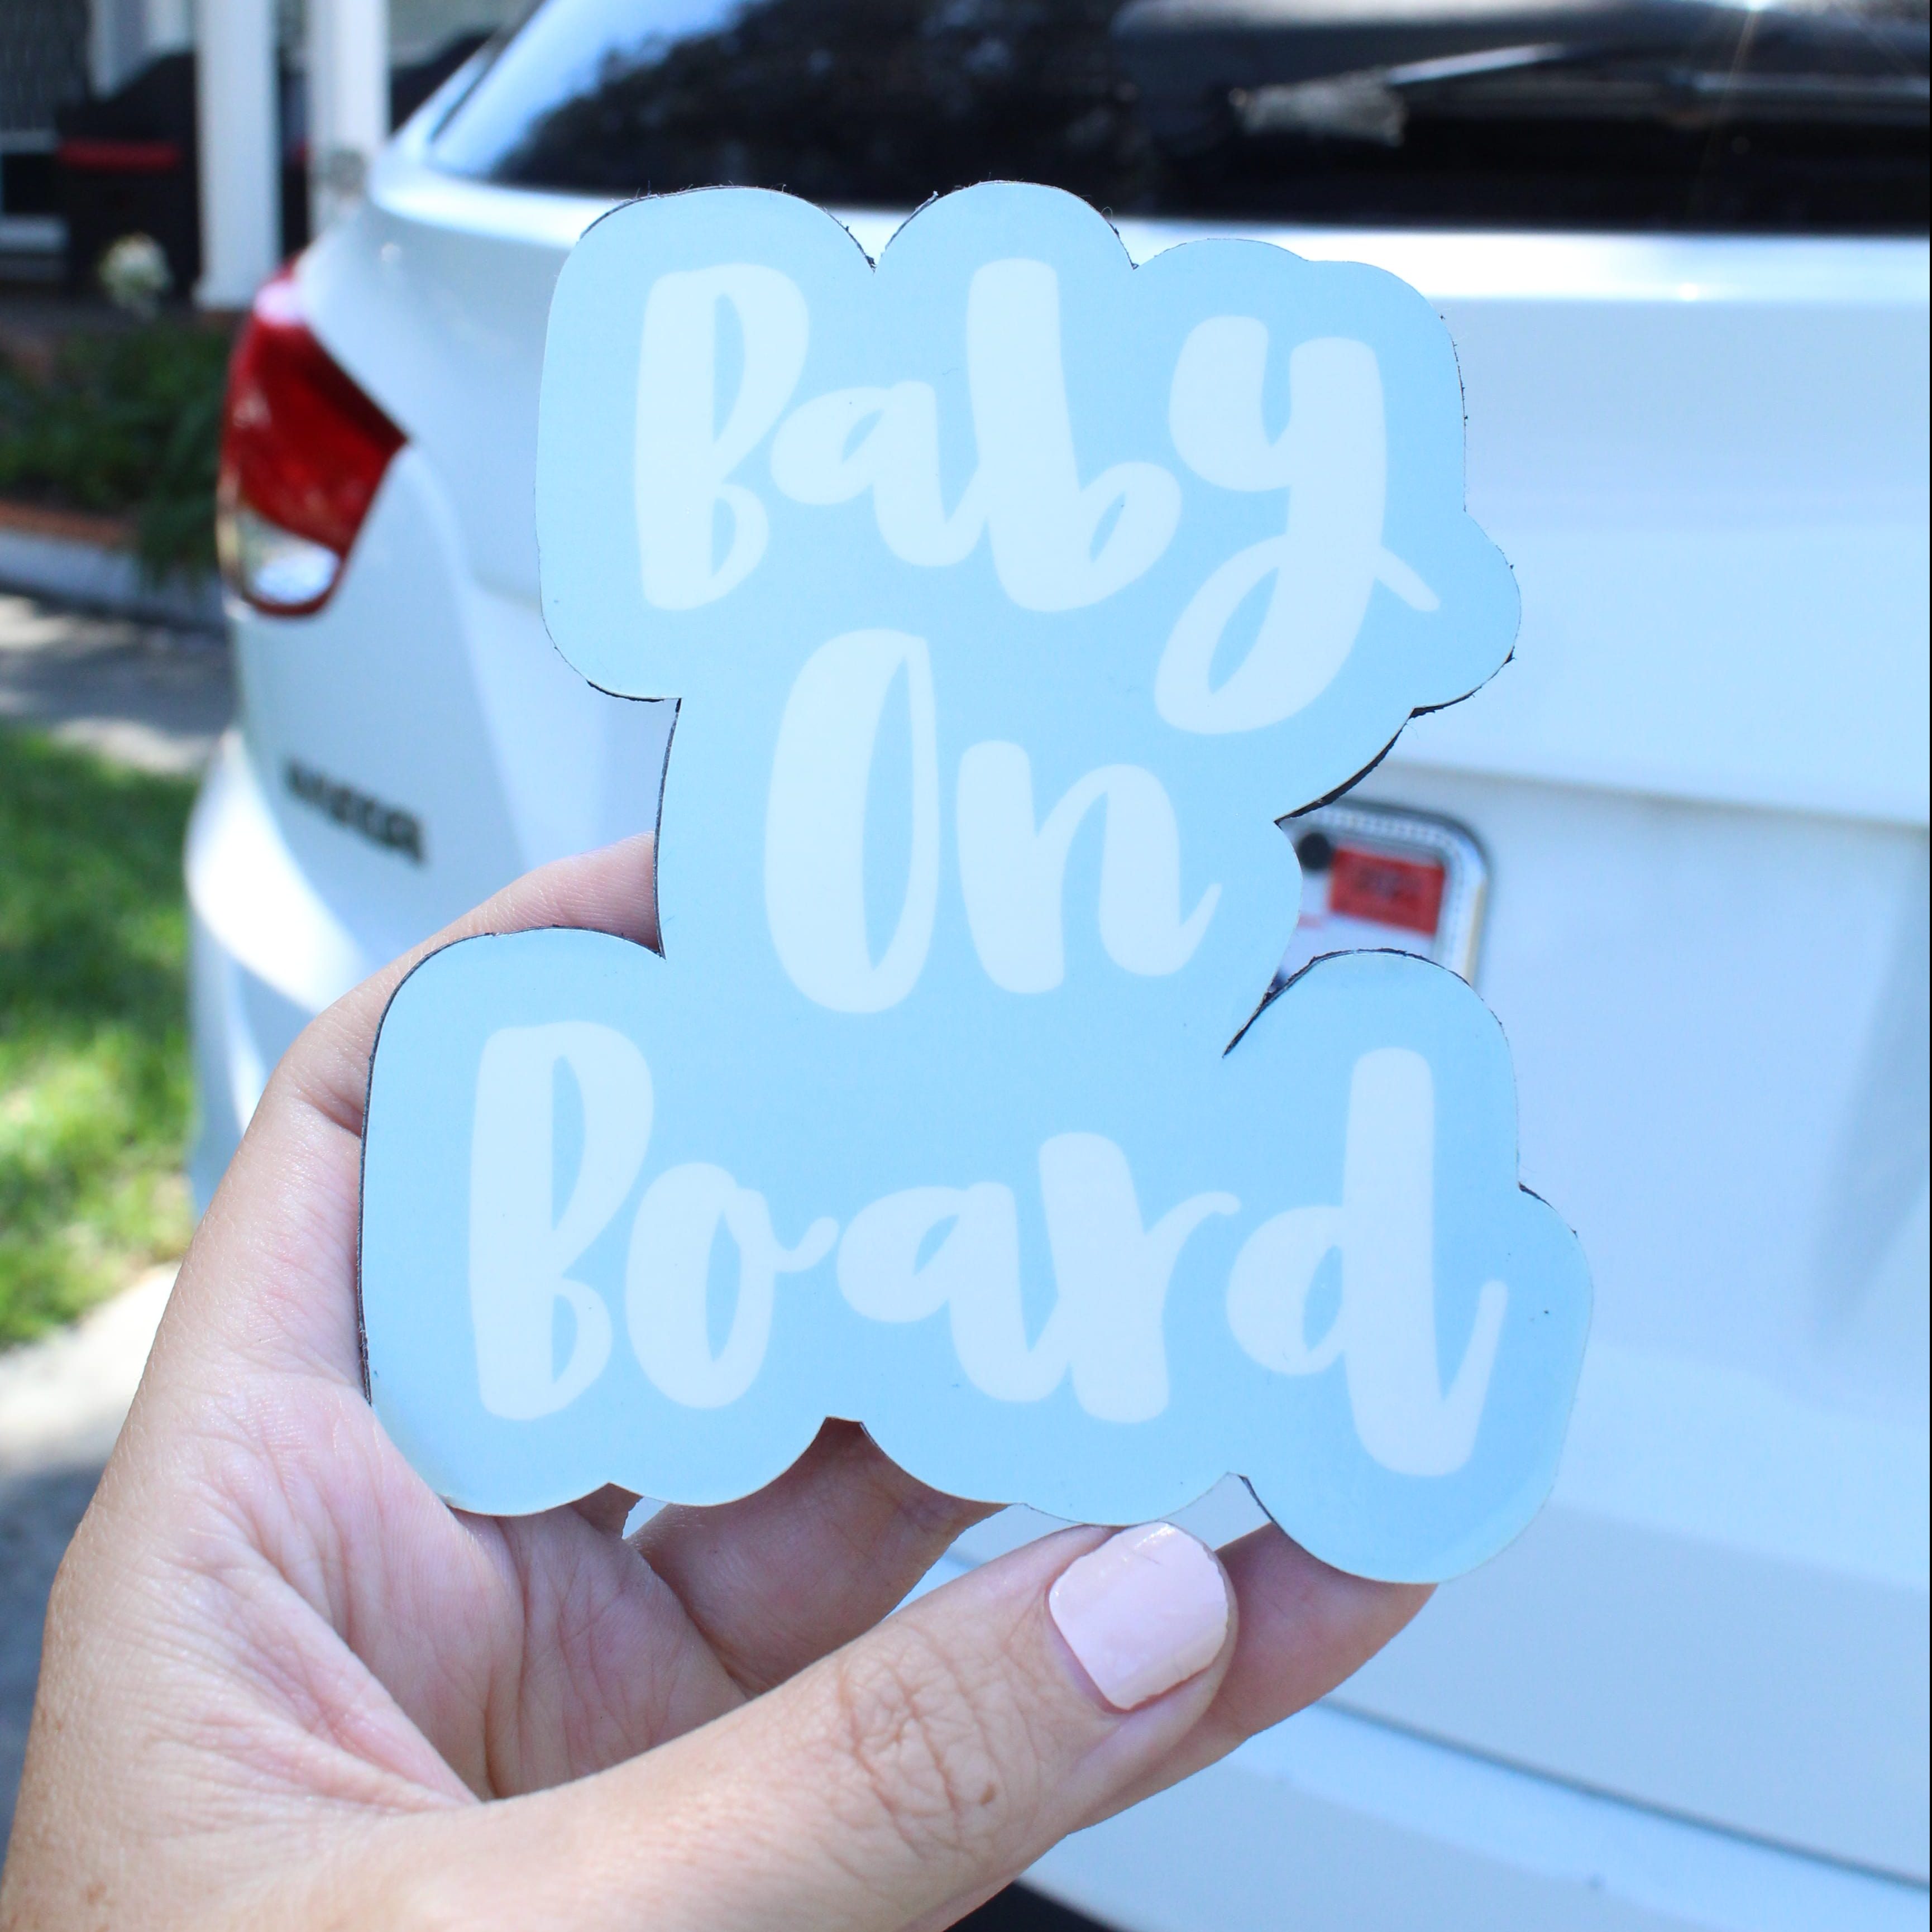 How To Make Your Own DIY Magnets With Stickers or Decals